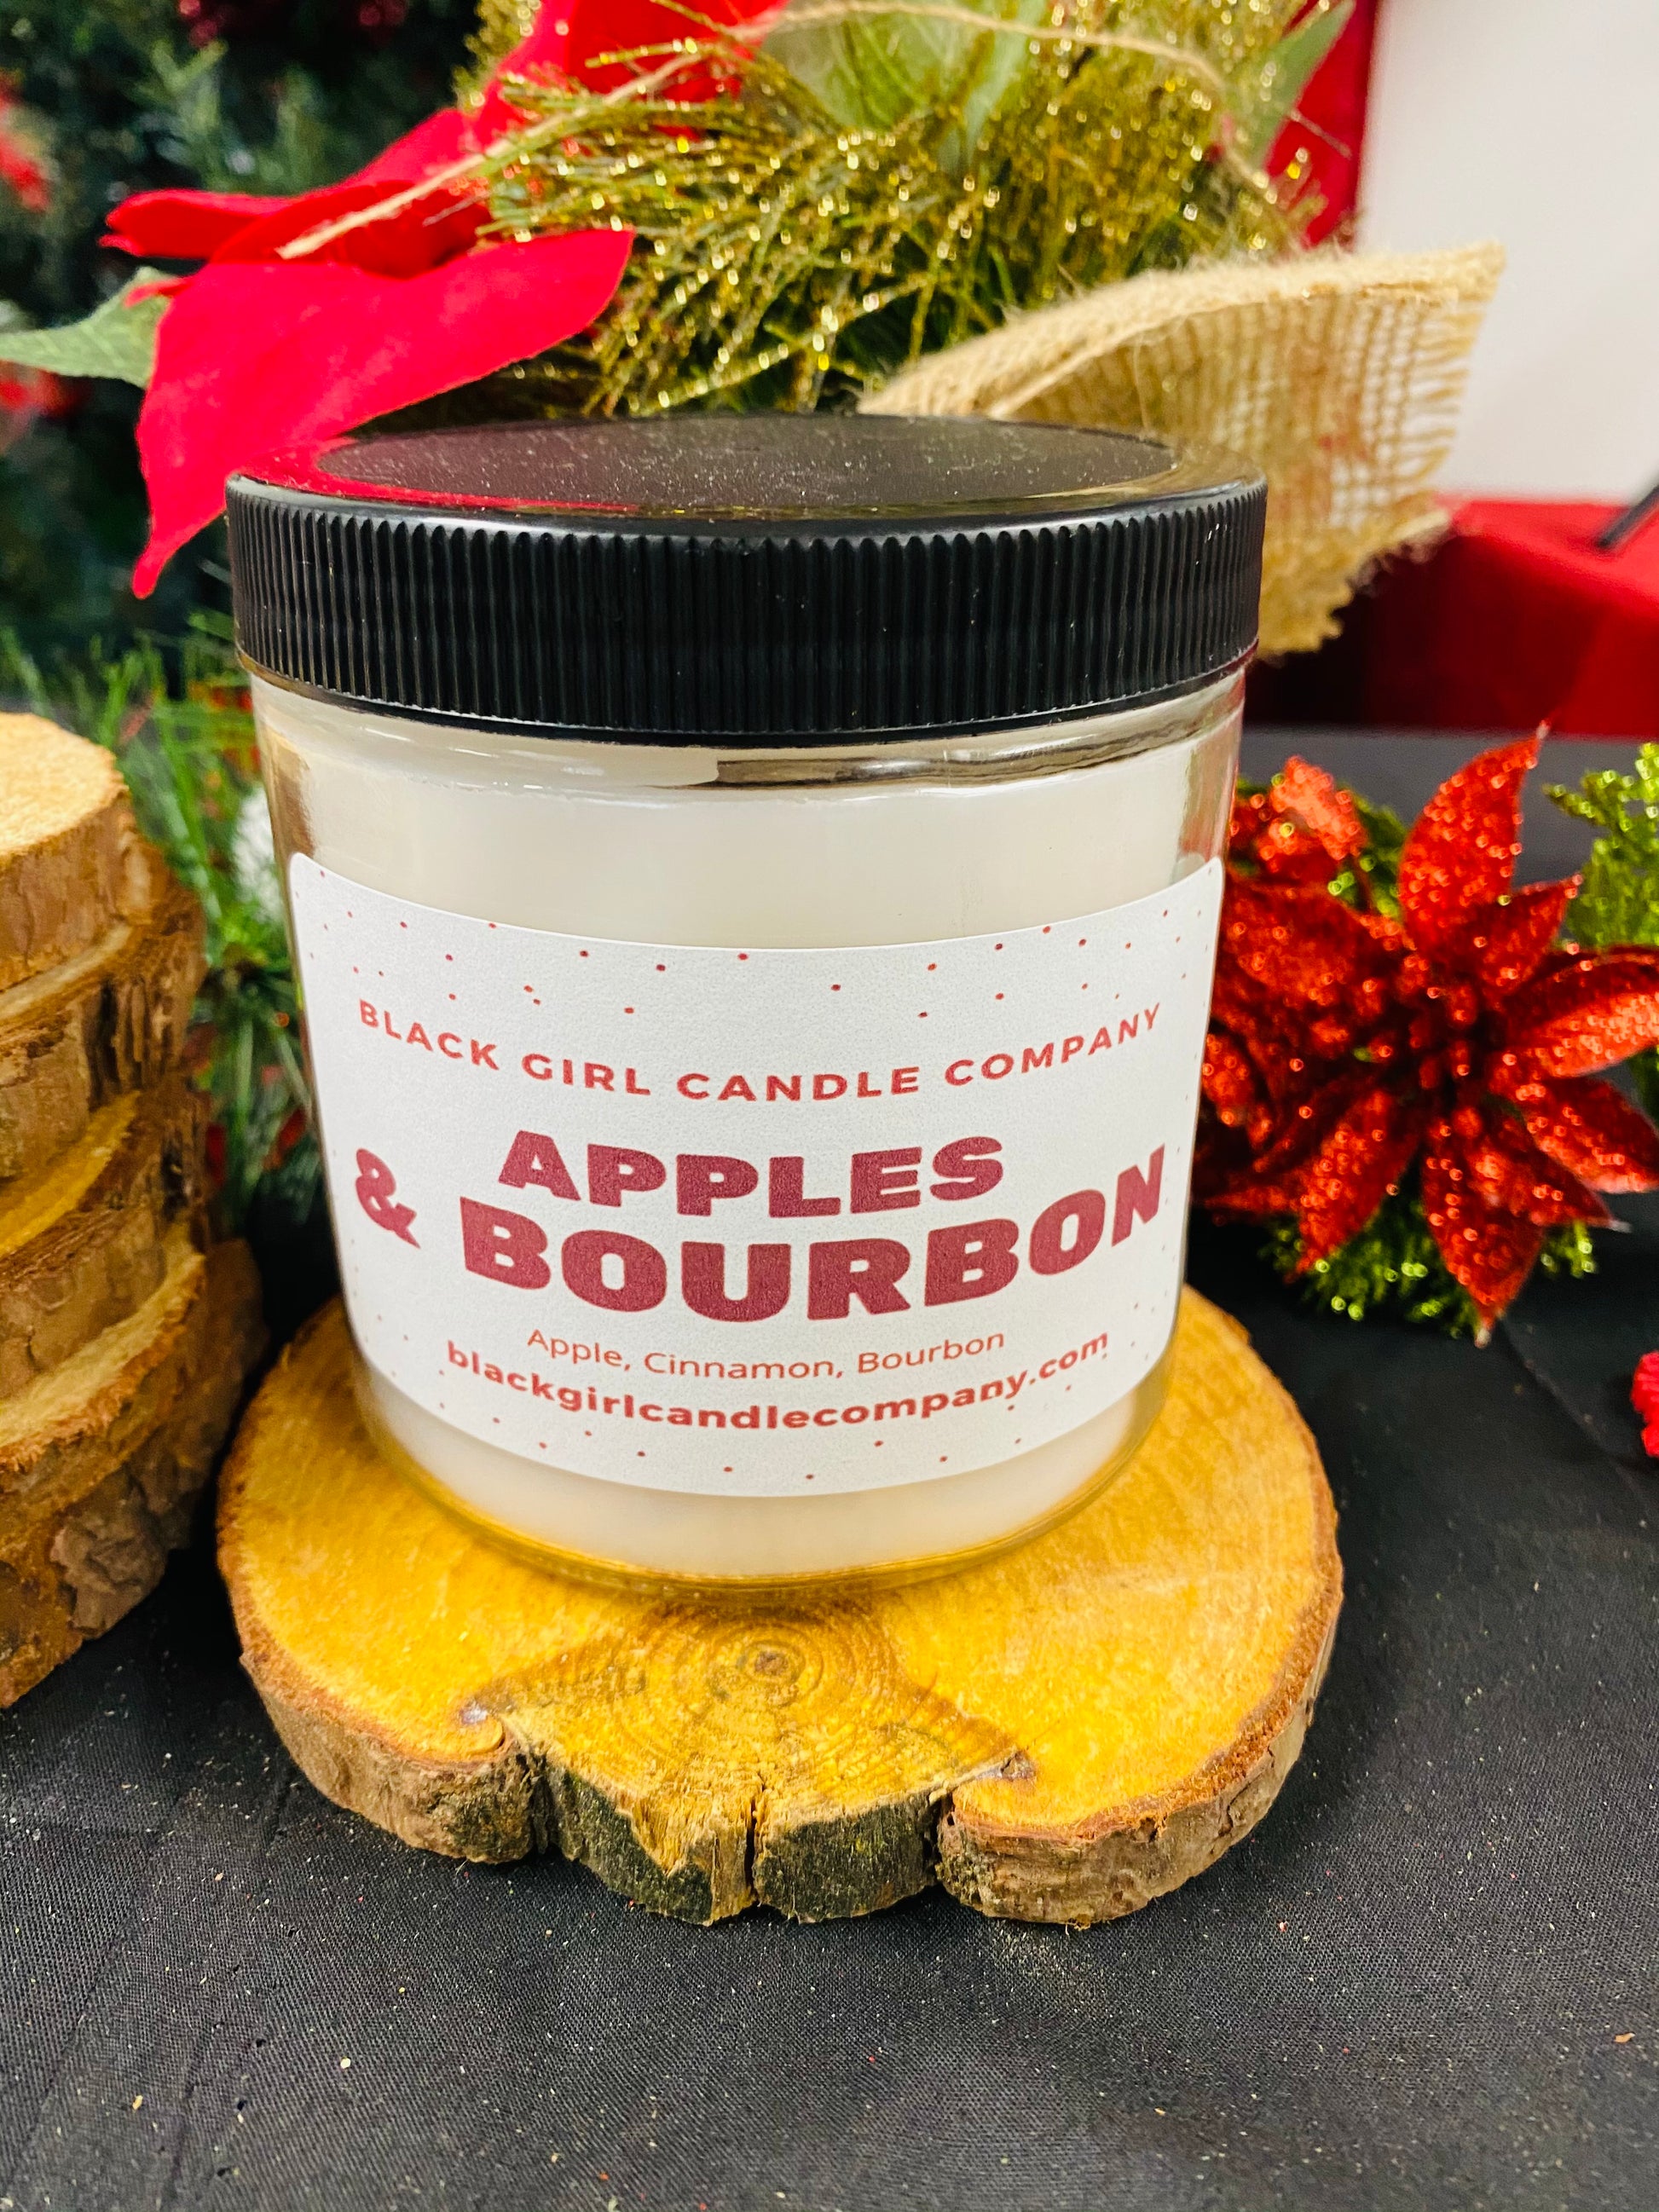 Black Girl Candle Company "Apples & Bourbon" Candle. White wax in clear jar with white label and black lid. Resting on wooden coaster, red and gold flowers in background